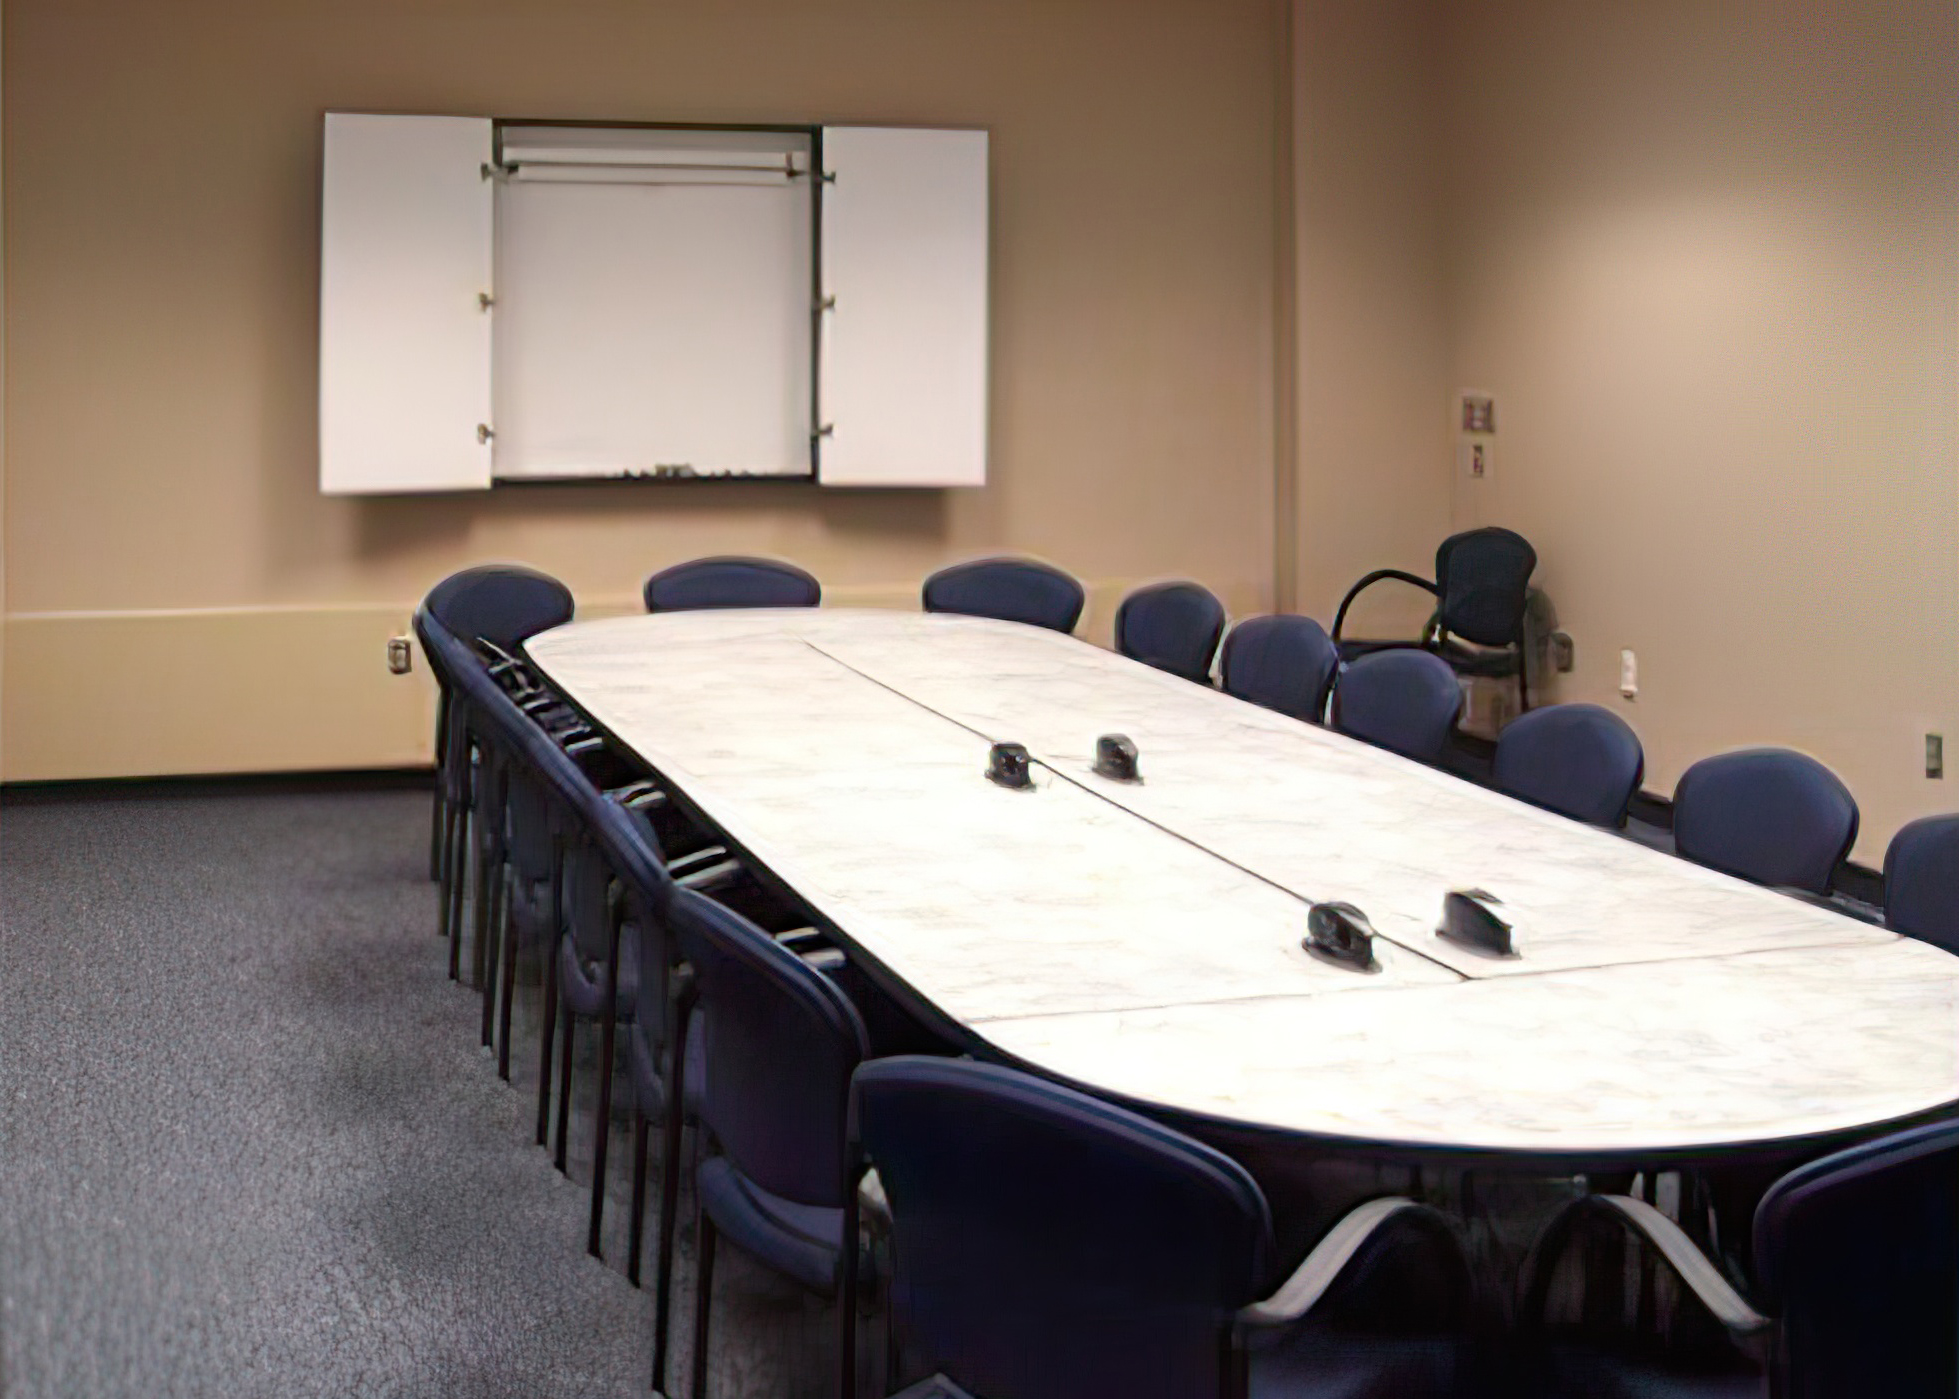 A long, conference table, surrounded by chairs, faces a wall with an open cabinet with a whiteboard.